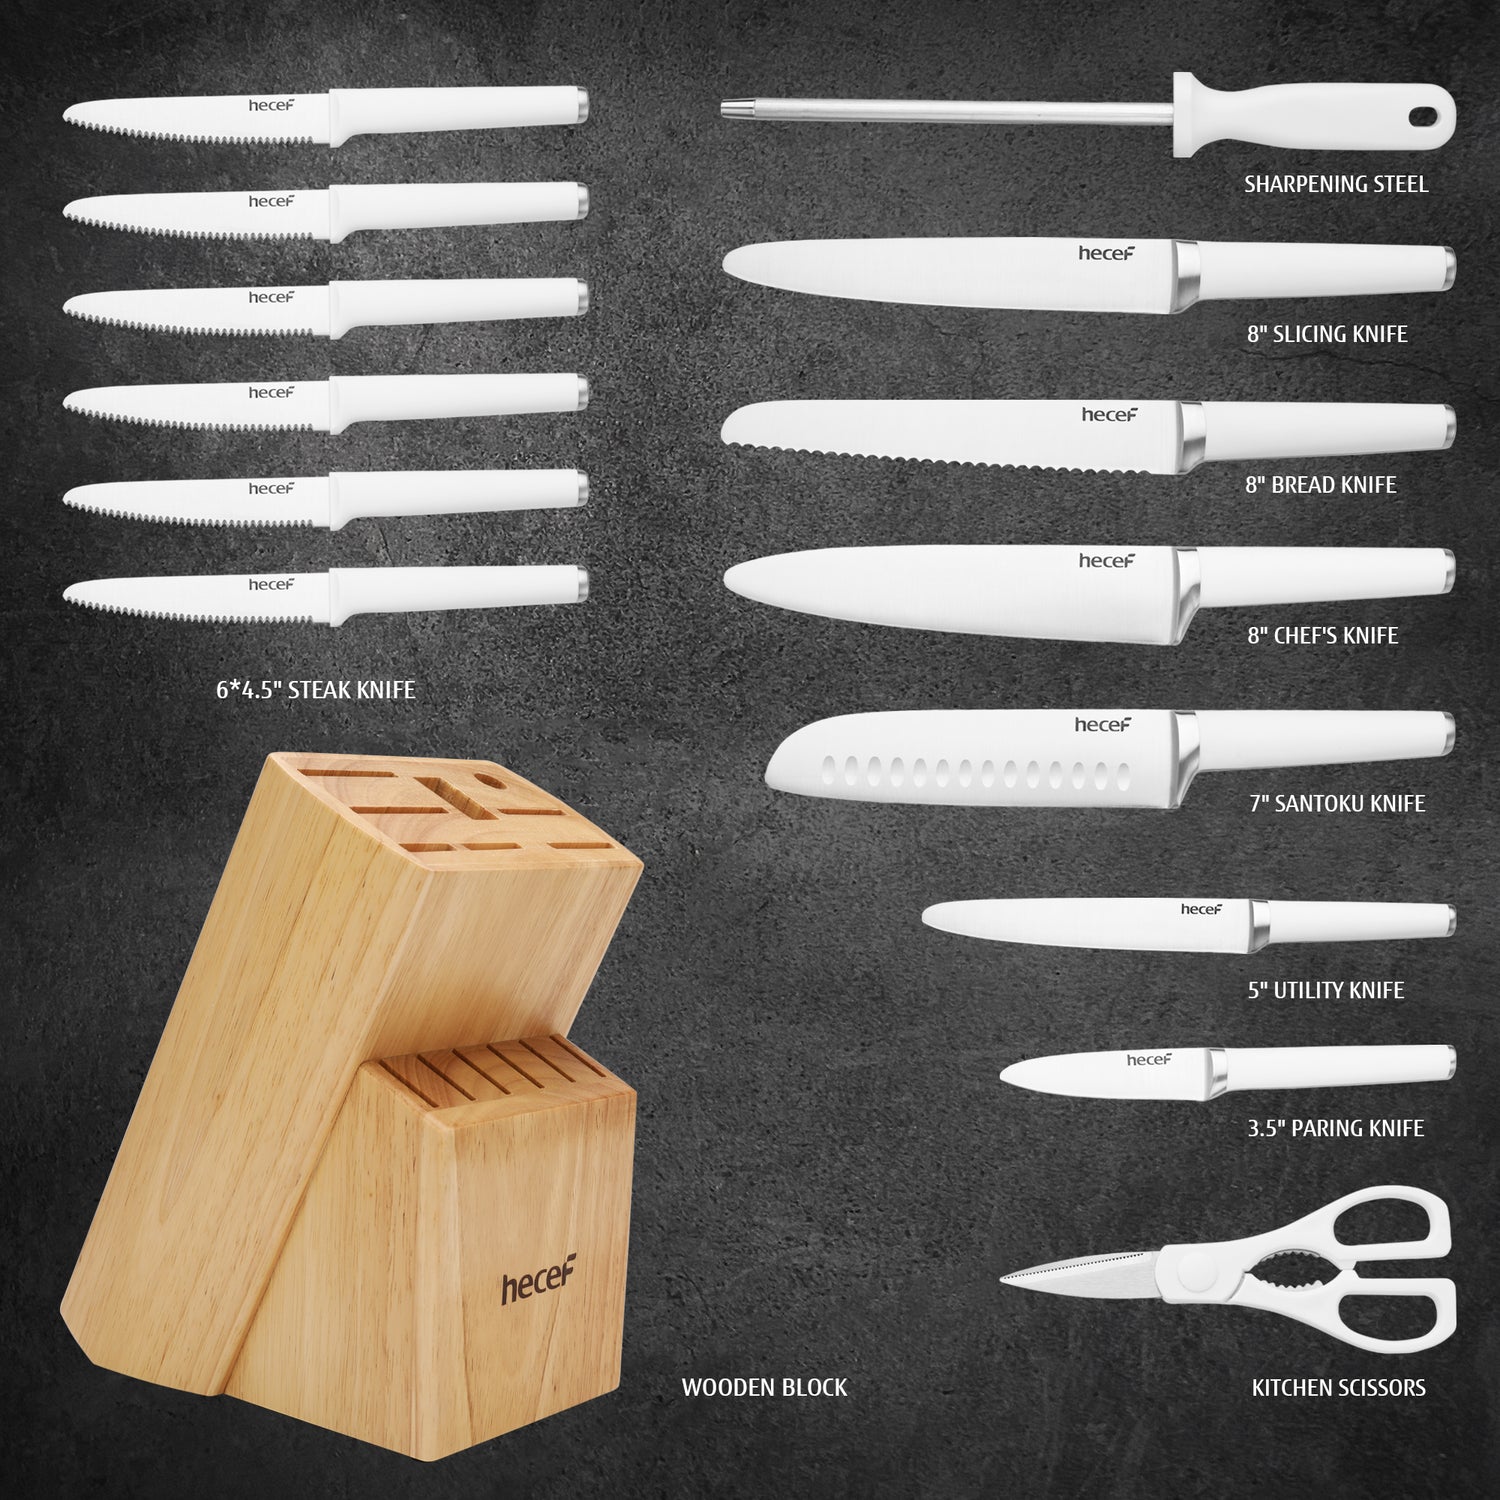  hecef Kitchen Knife Block Set, 12 Pieces Knife Set with Wooden  Block & Steak Knives Set, Lightweight and Strong High Carbon Stainless  Steel Cutlery Set, Extended Handle Design: Home & Kitchen